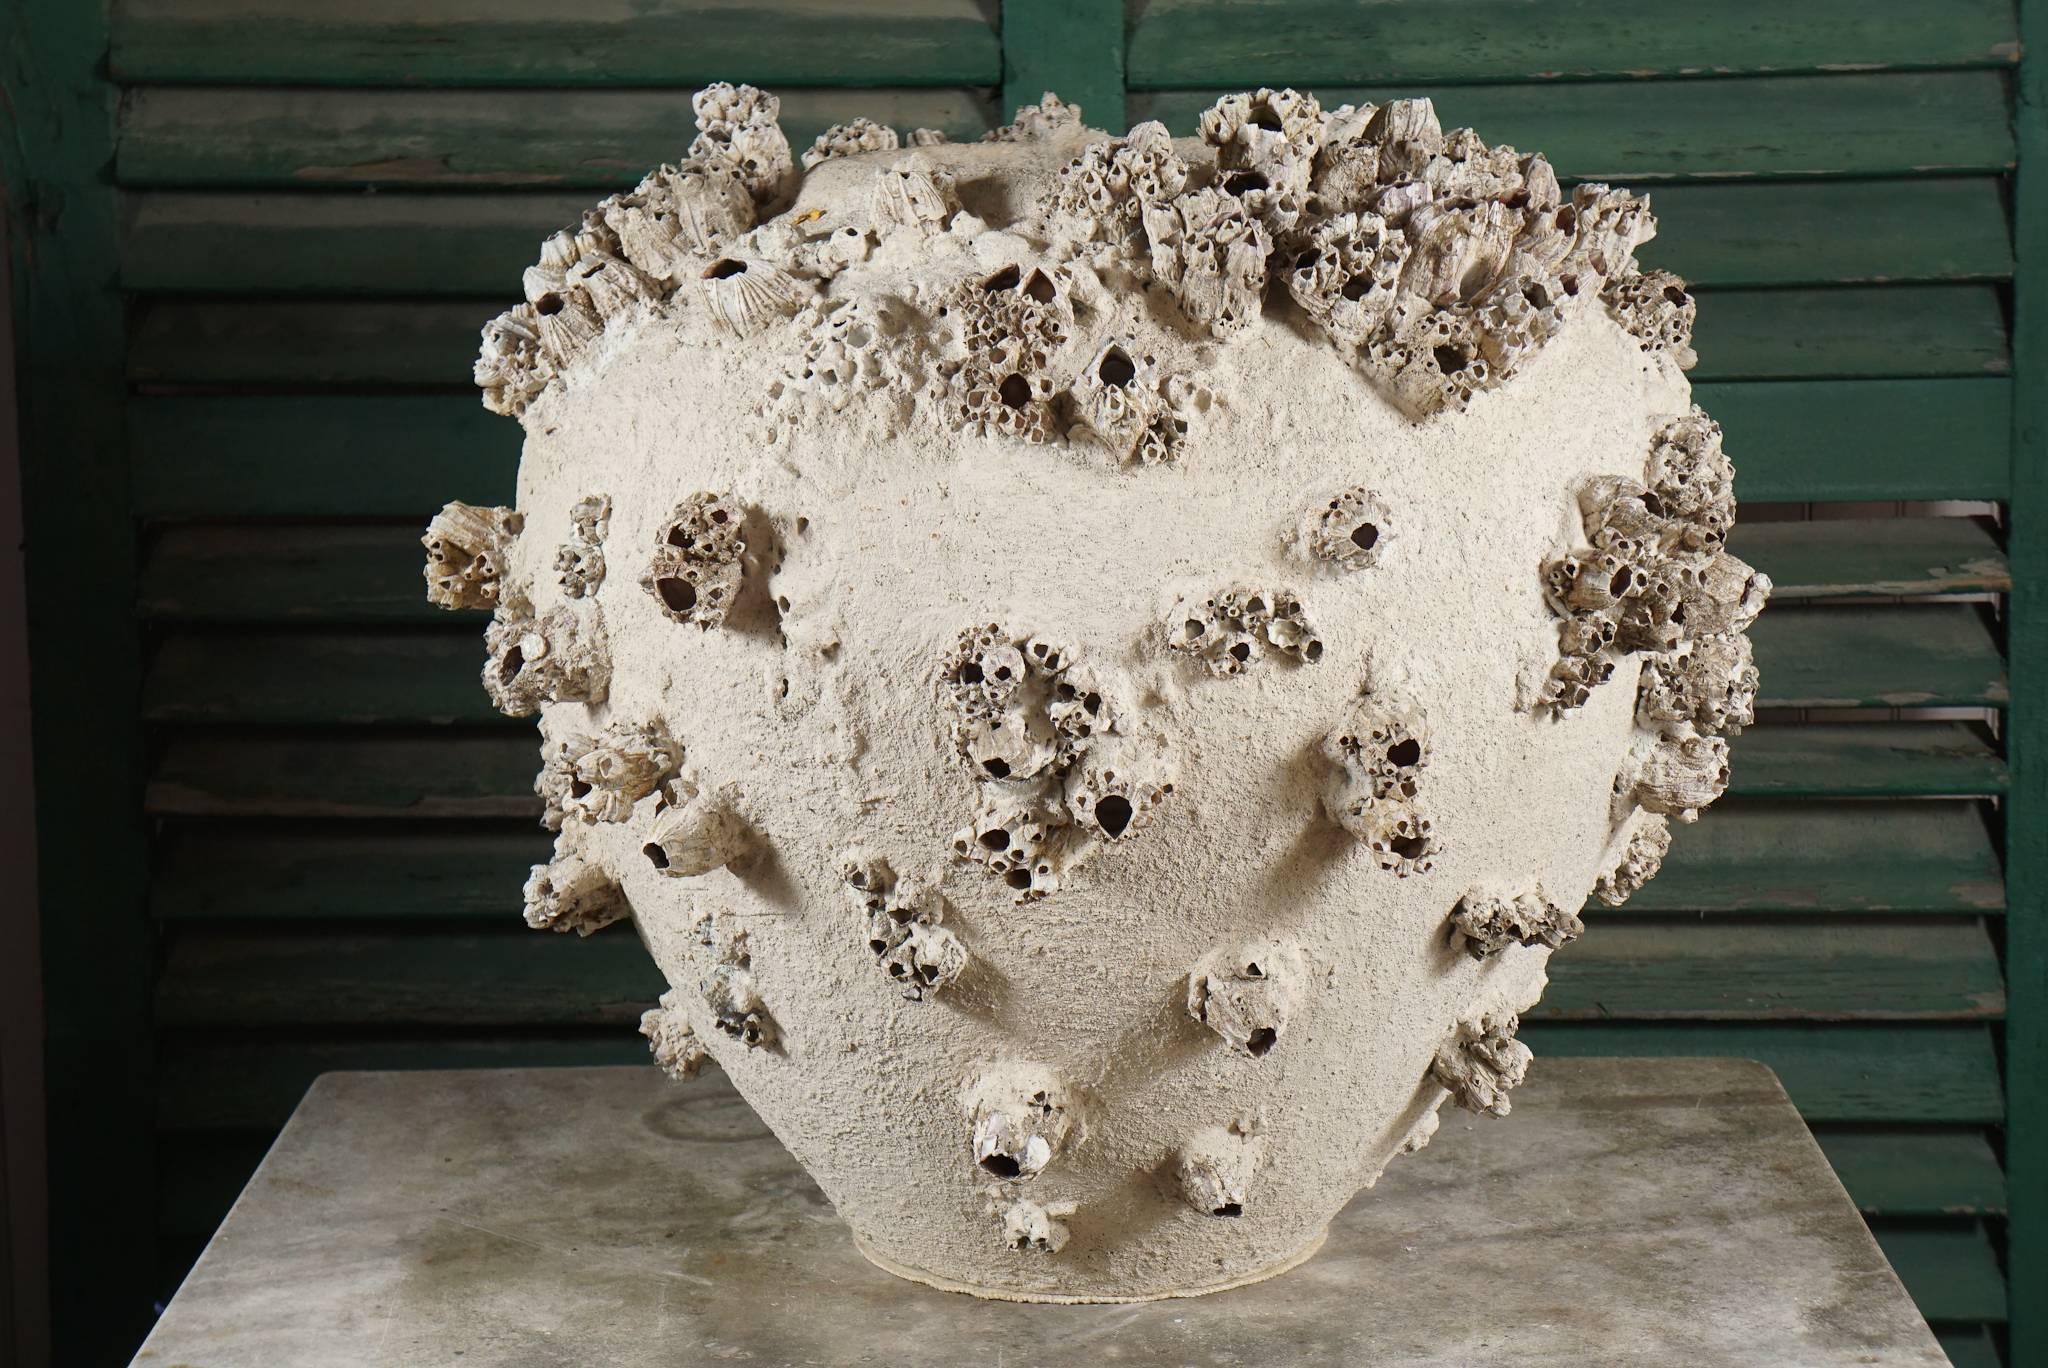 Large jar covered with barnacles; at some point in time a sand wash was applied to the surface and interior give it uniformity leaving the barnacles in their natural color.